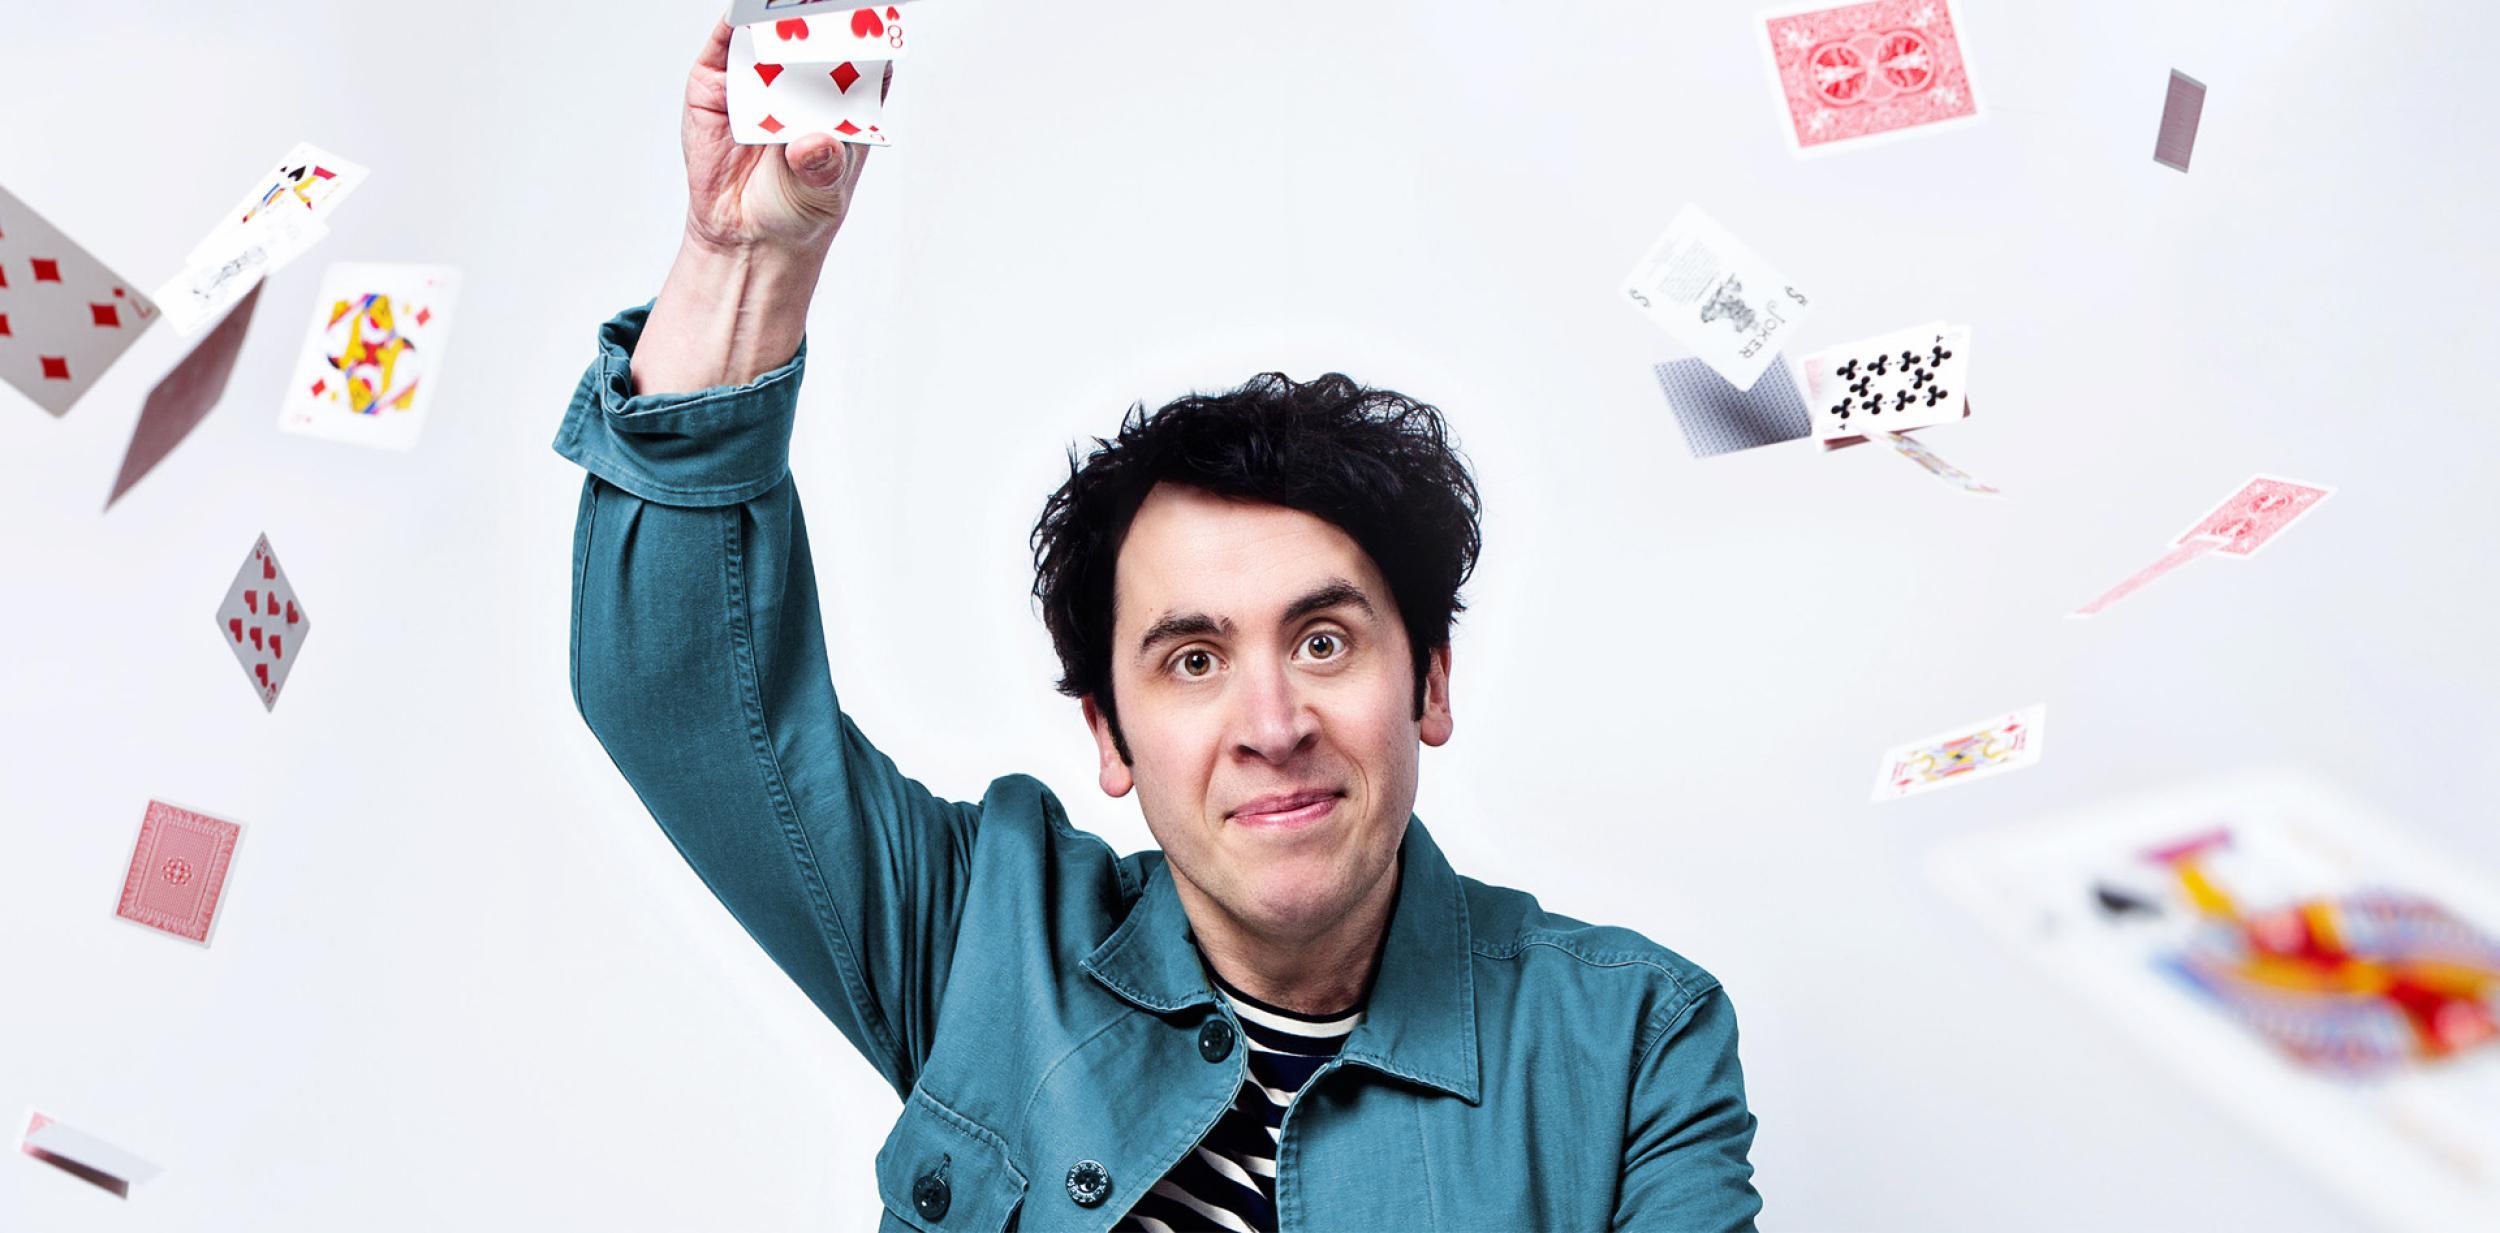 Man in denim shirt with arm raised holding playing card, with other playing cards flying around the space